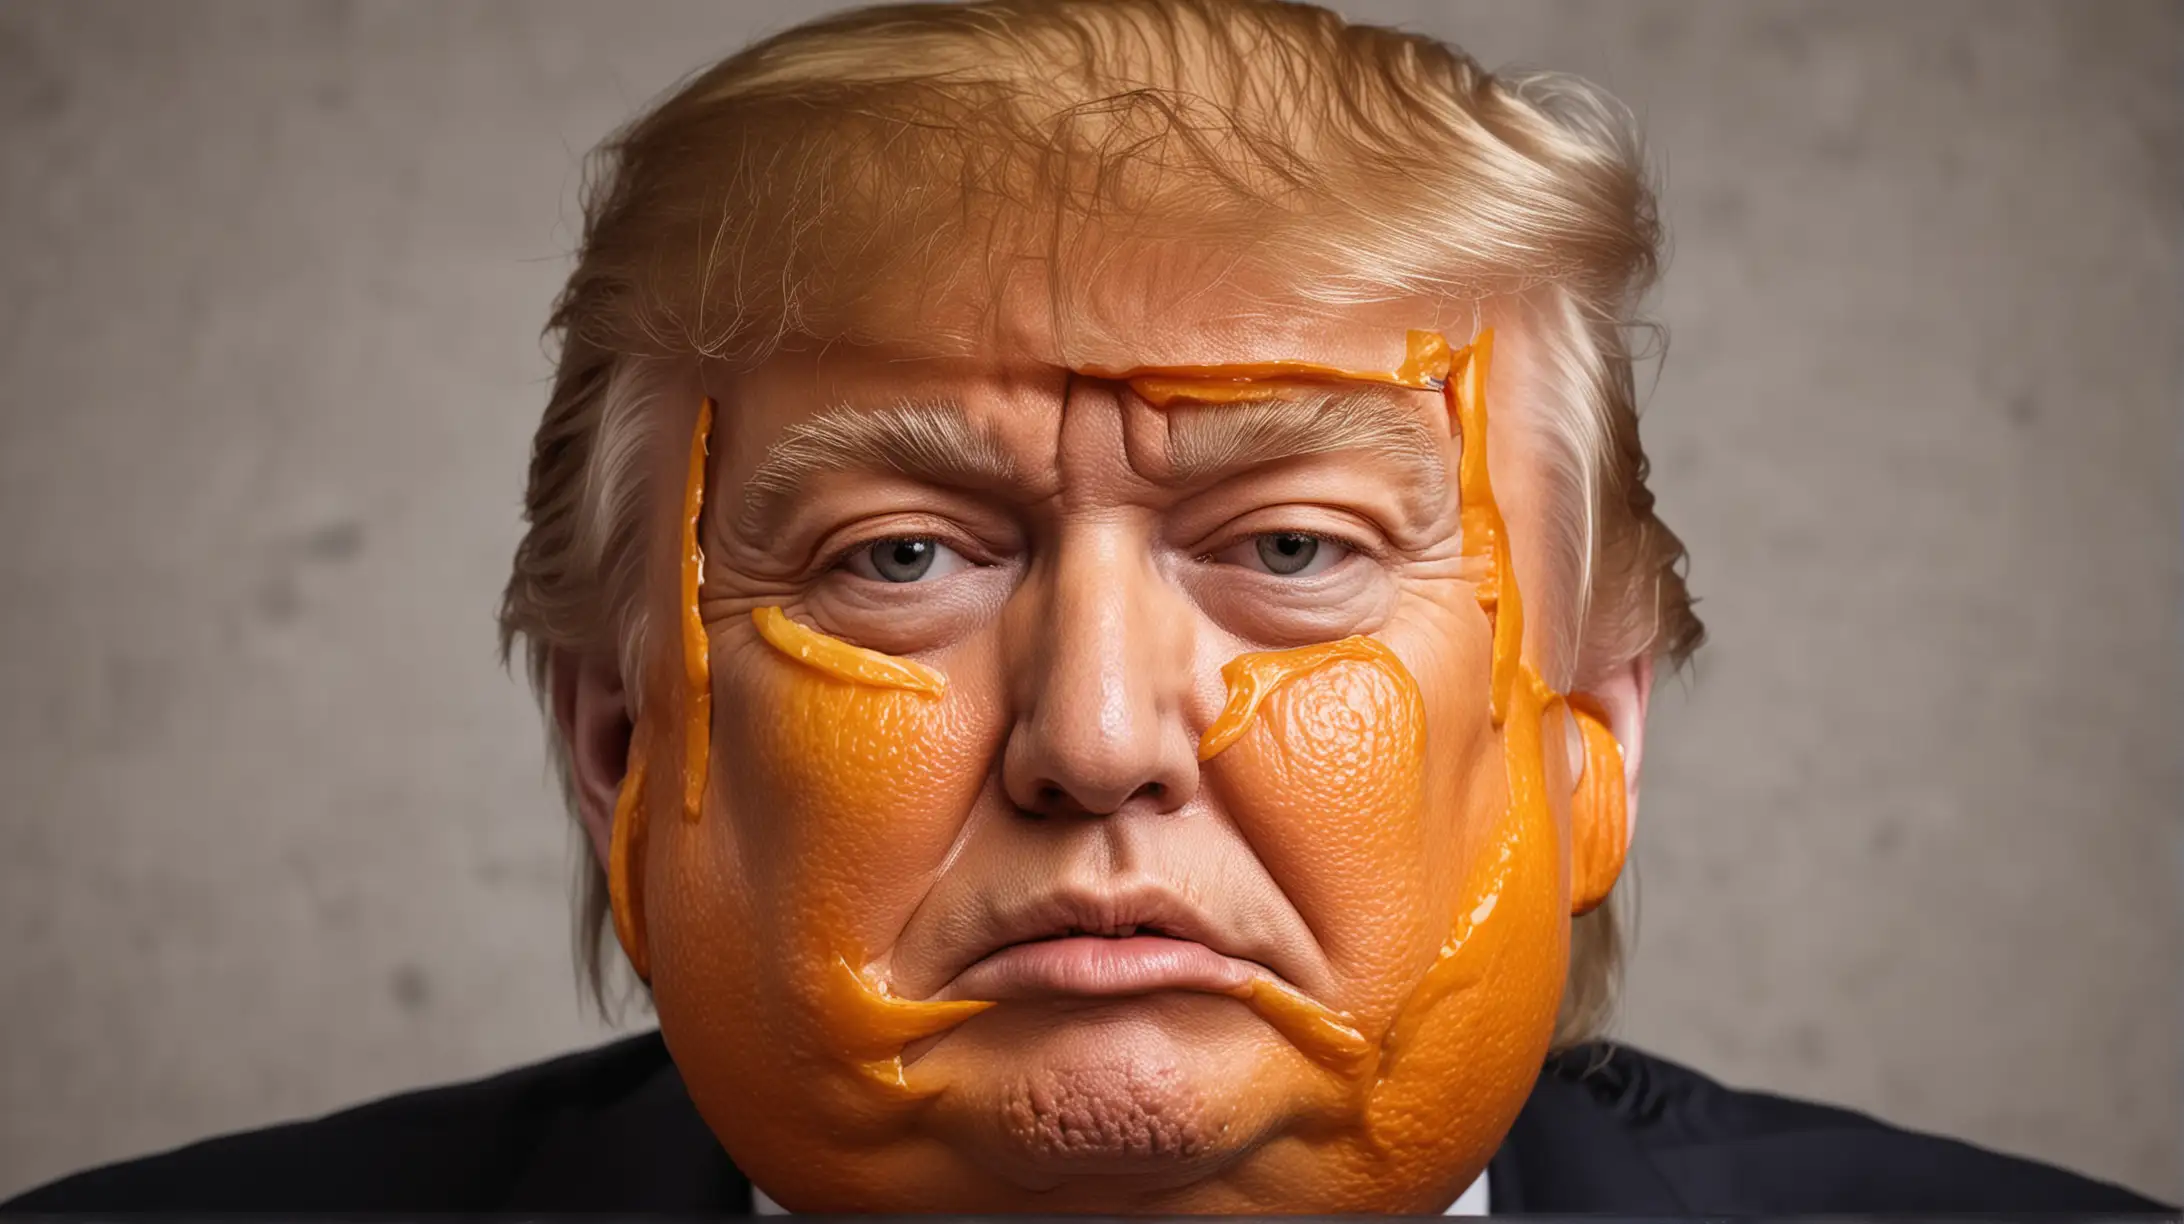 squeezed orange with the face of donald trump